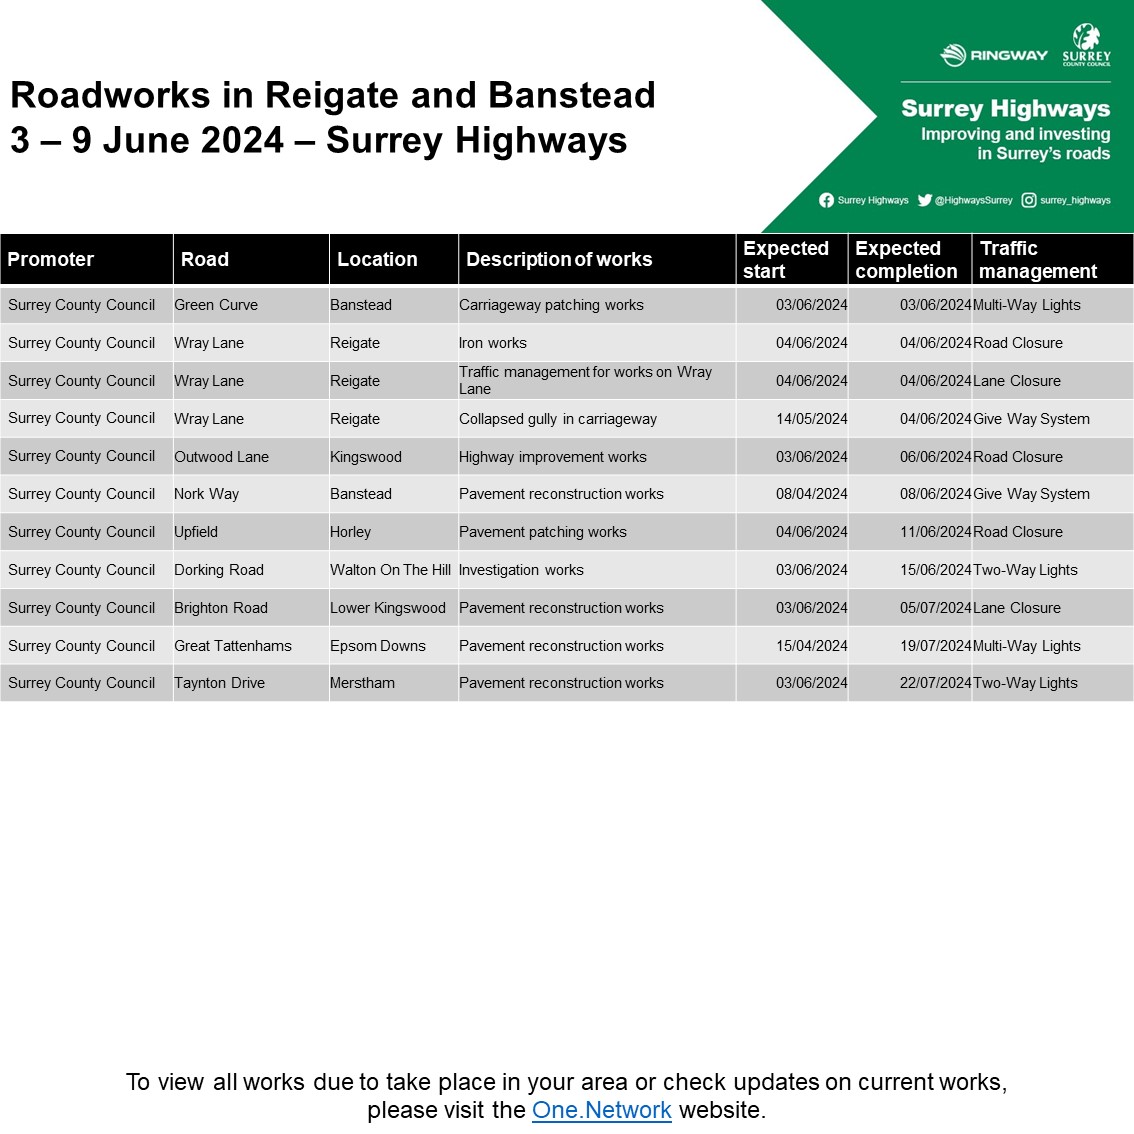 🚦 Reigate and Banstead planned roadworks 🗓️ Week commencing 3/6/24 #Reigate #Banstead #Redhill #Horley #Salfords #Chipstead #Tadworth #WaltonOnTheHill @reigatebanstead Please be aware of an upcoming M25 closure by National Highways For more see orlo.uk/u3YCz